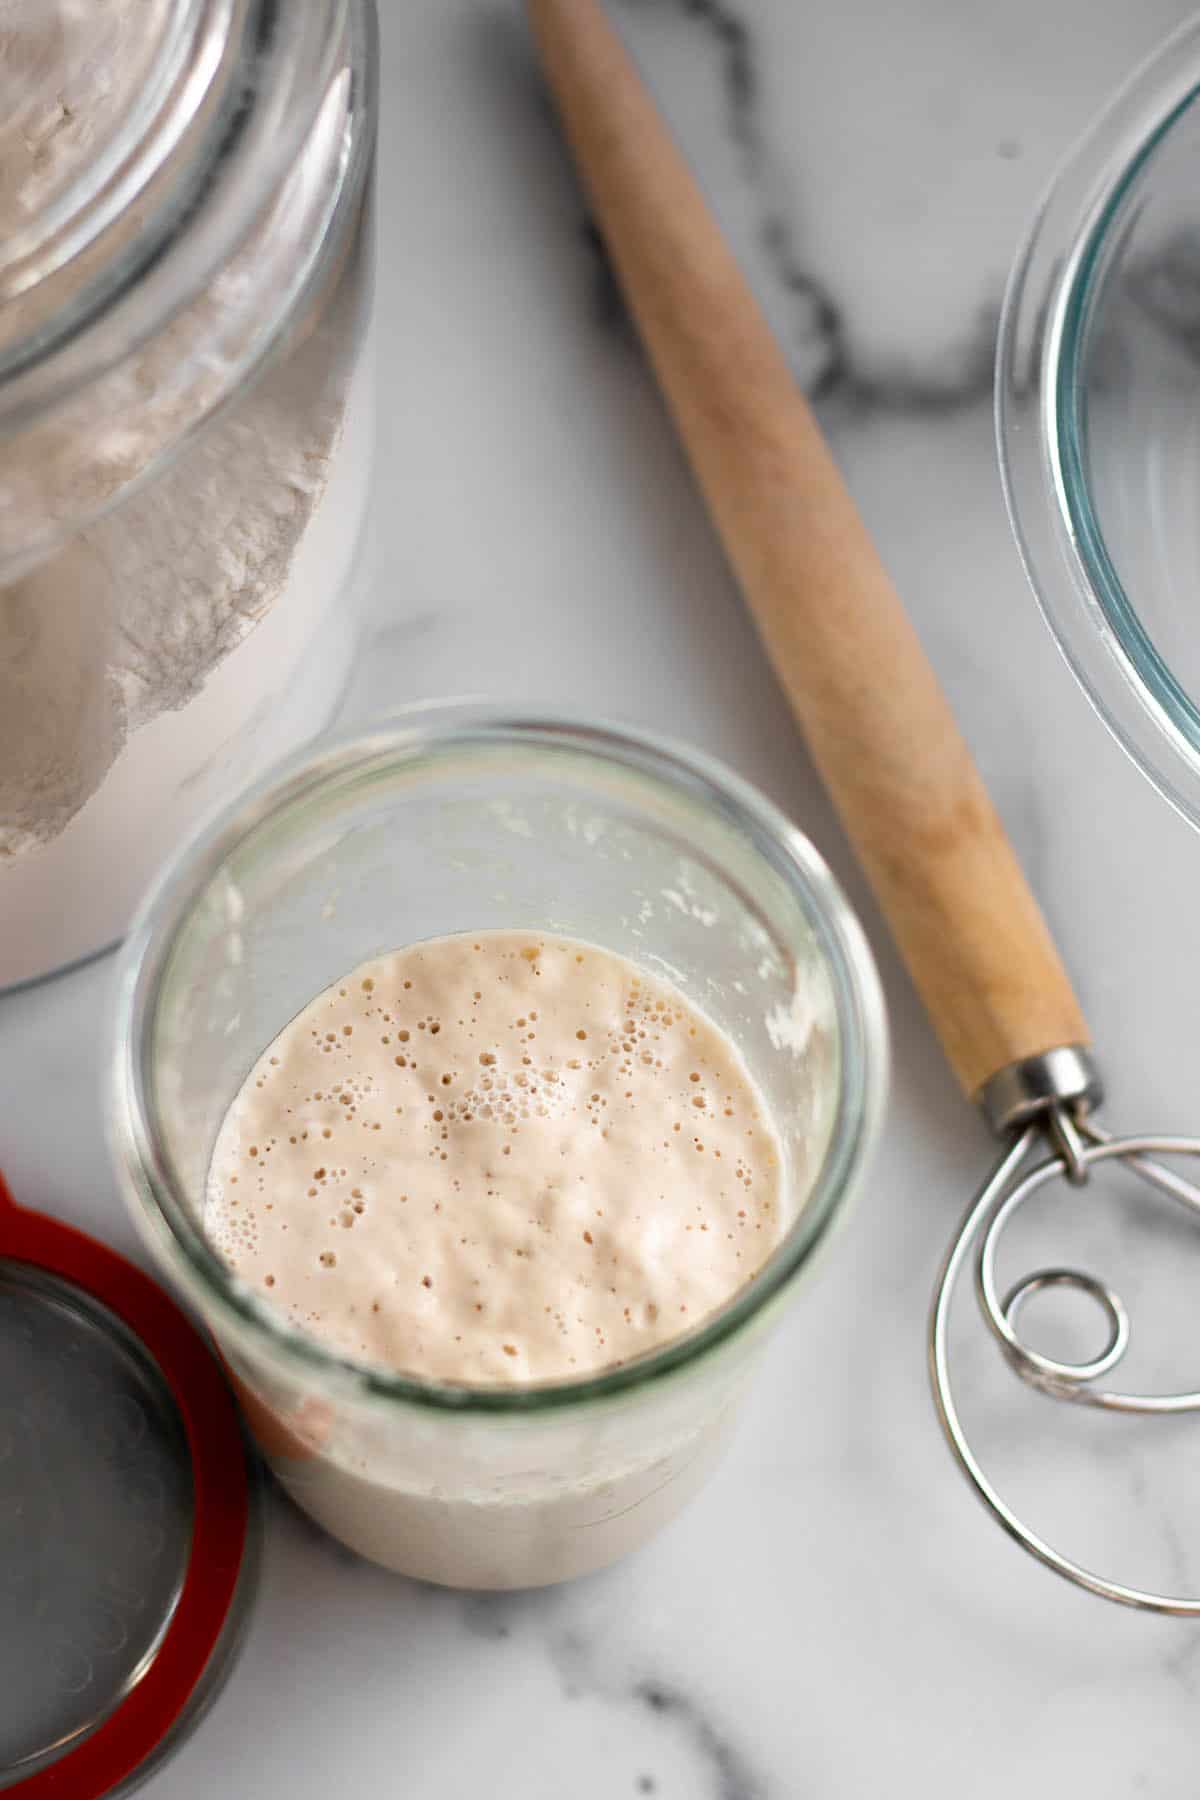 Overhead view of a jar of sourdough starter with a container of flour and danish dough whisk.